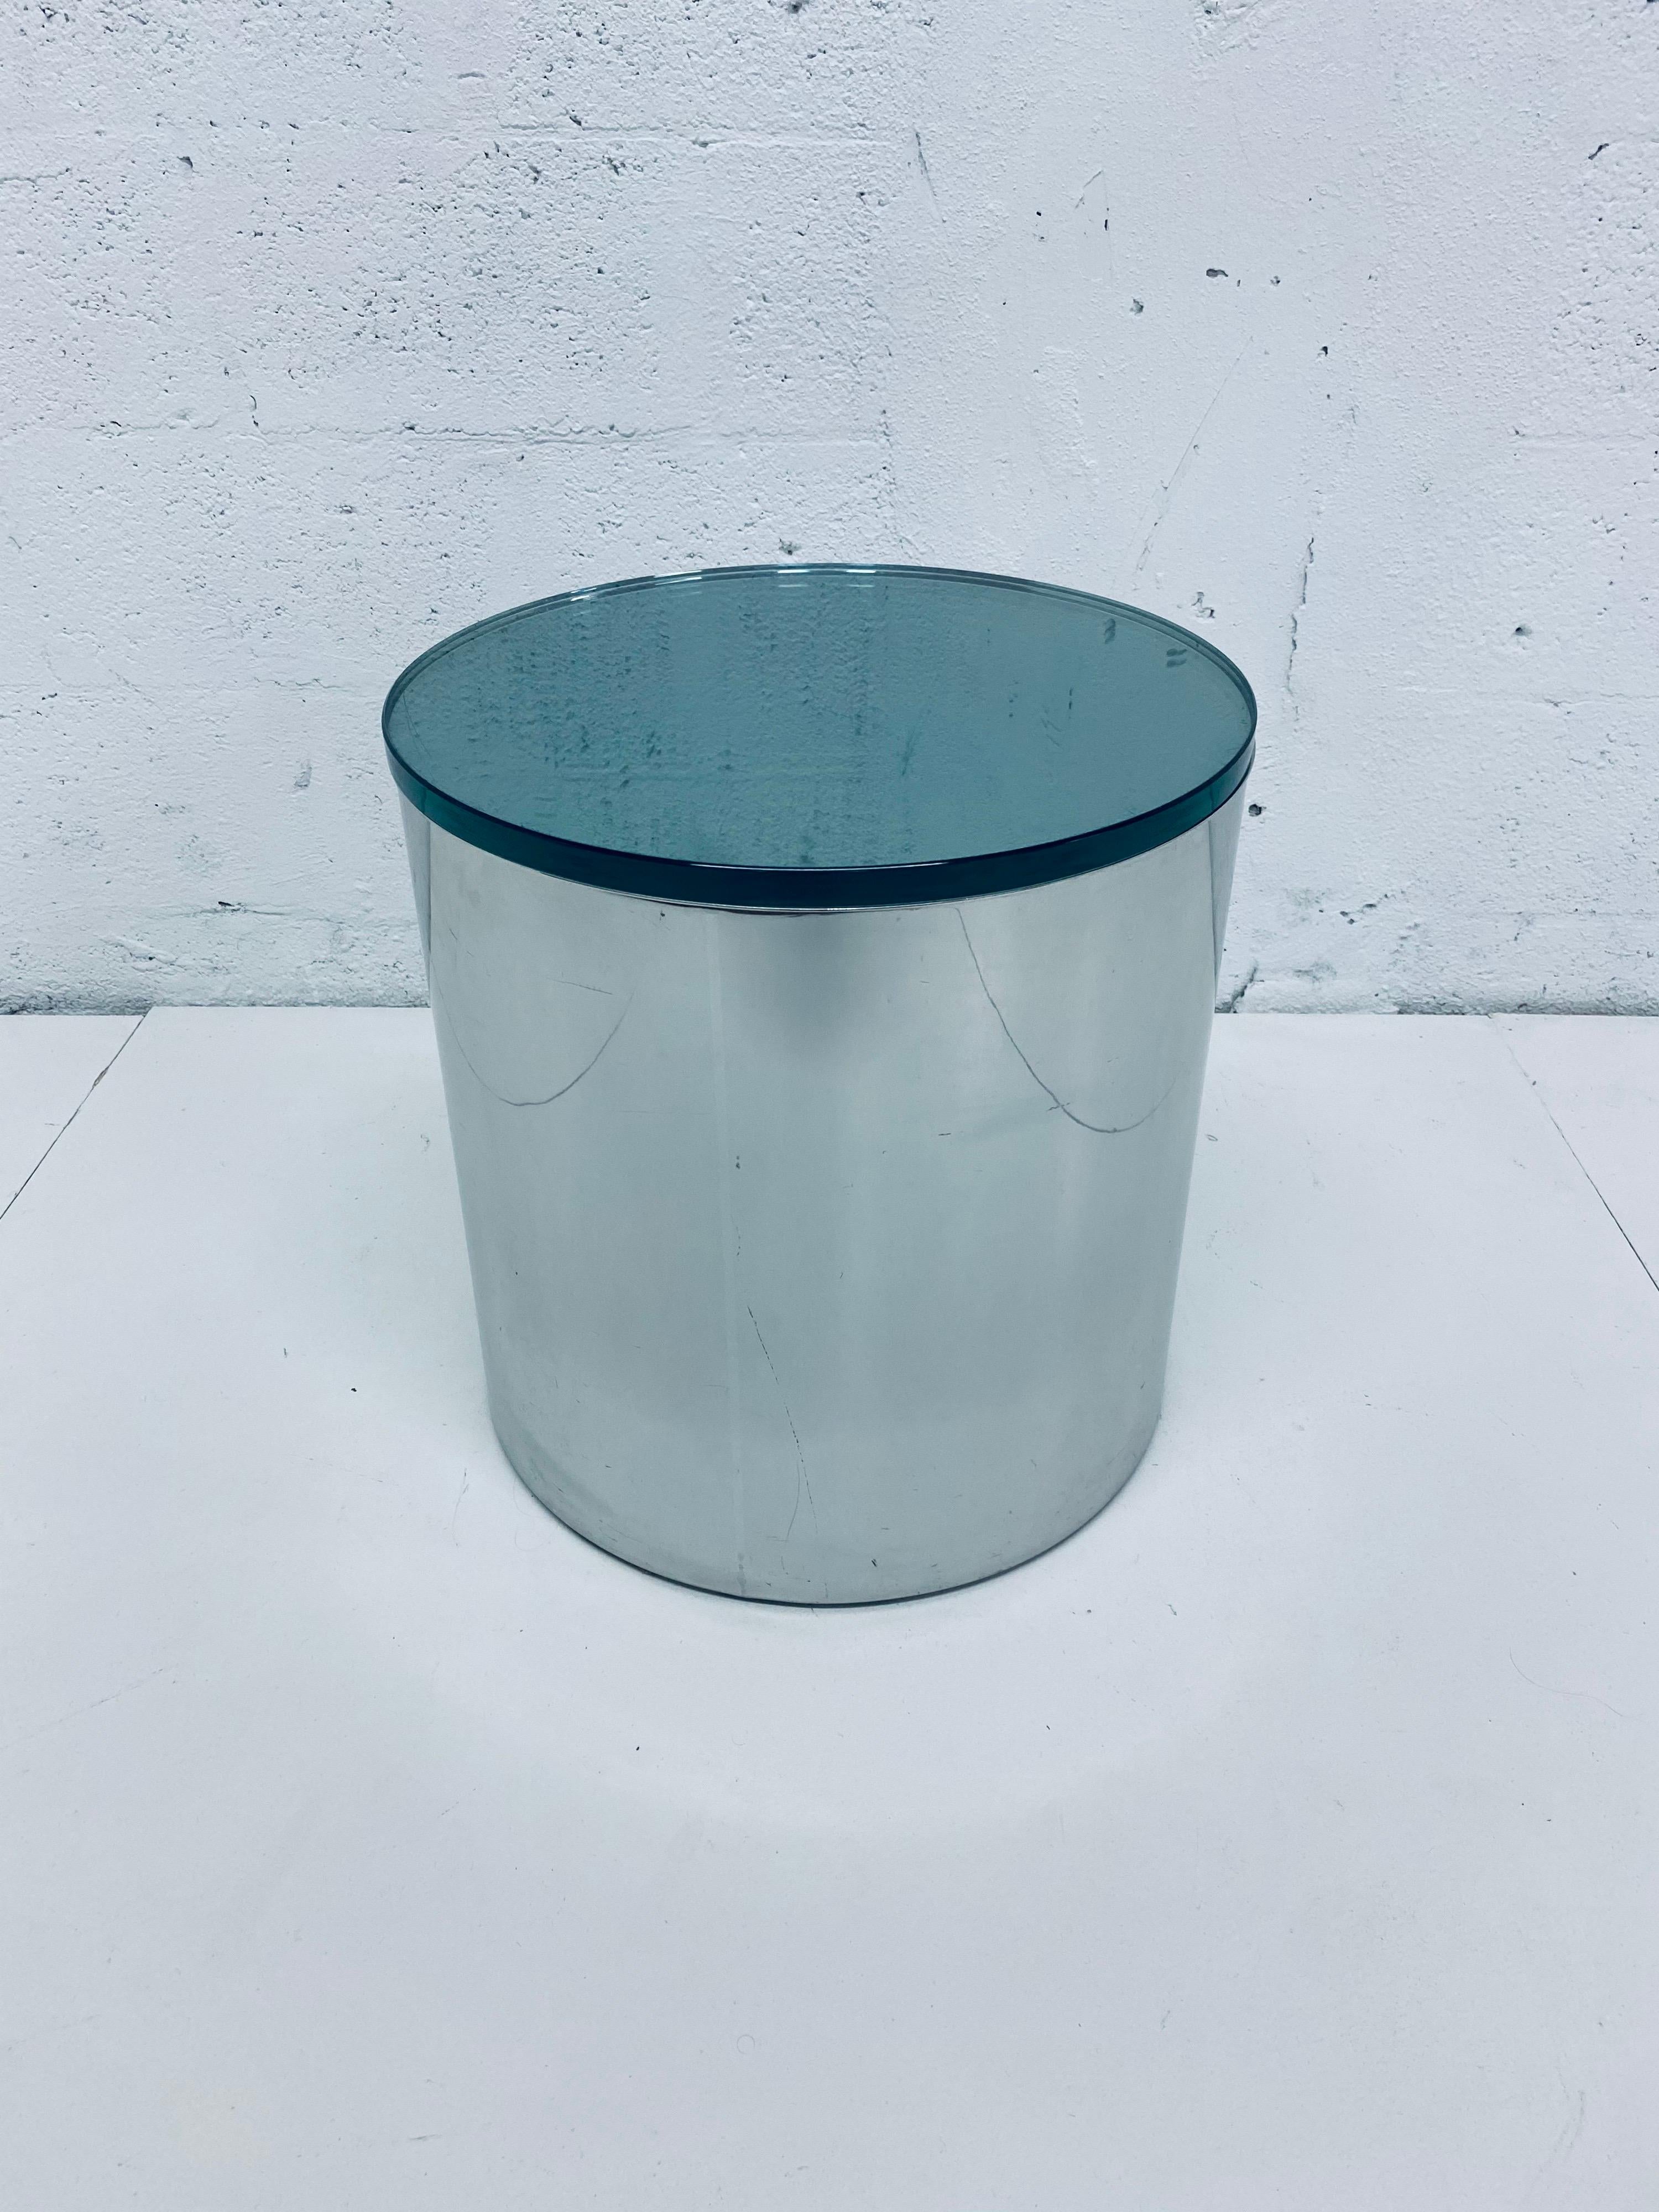 Paul Mayen Polished Steel and Glass Side Table for Habitat, 1970s For Sale 10